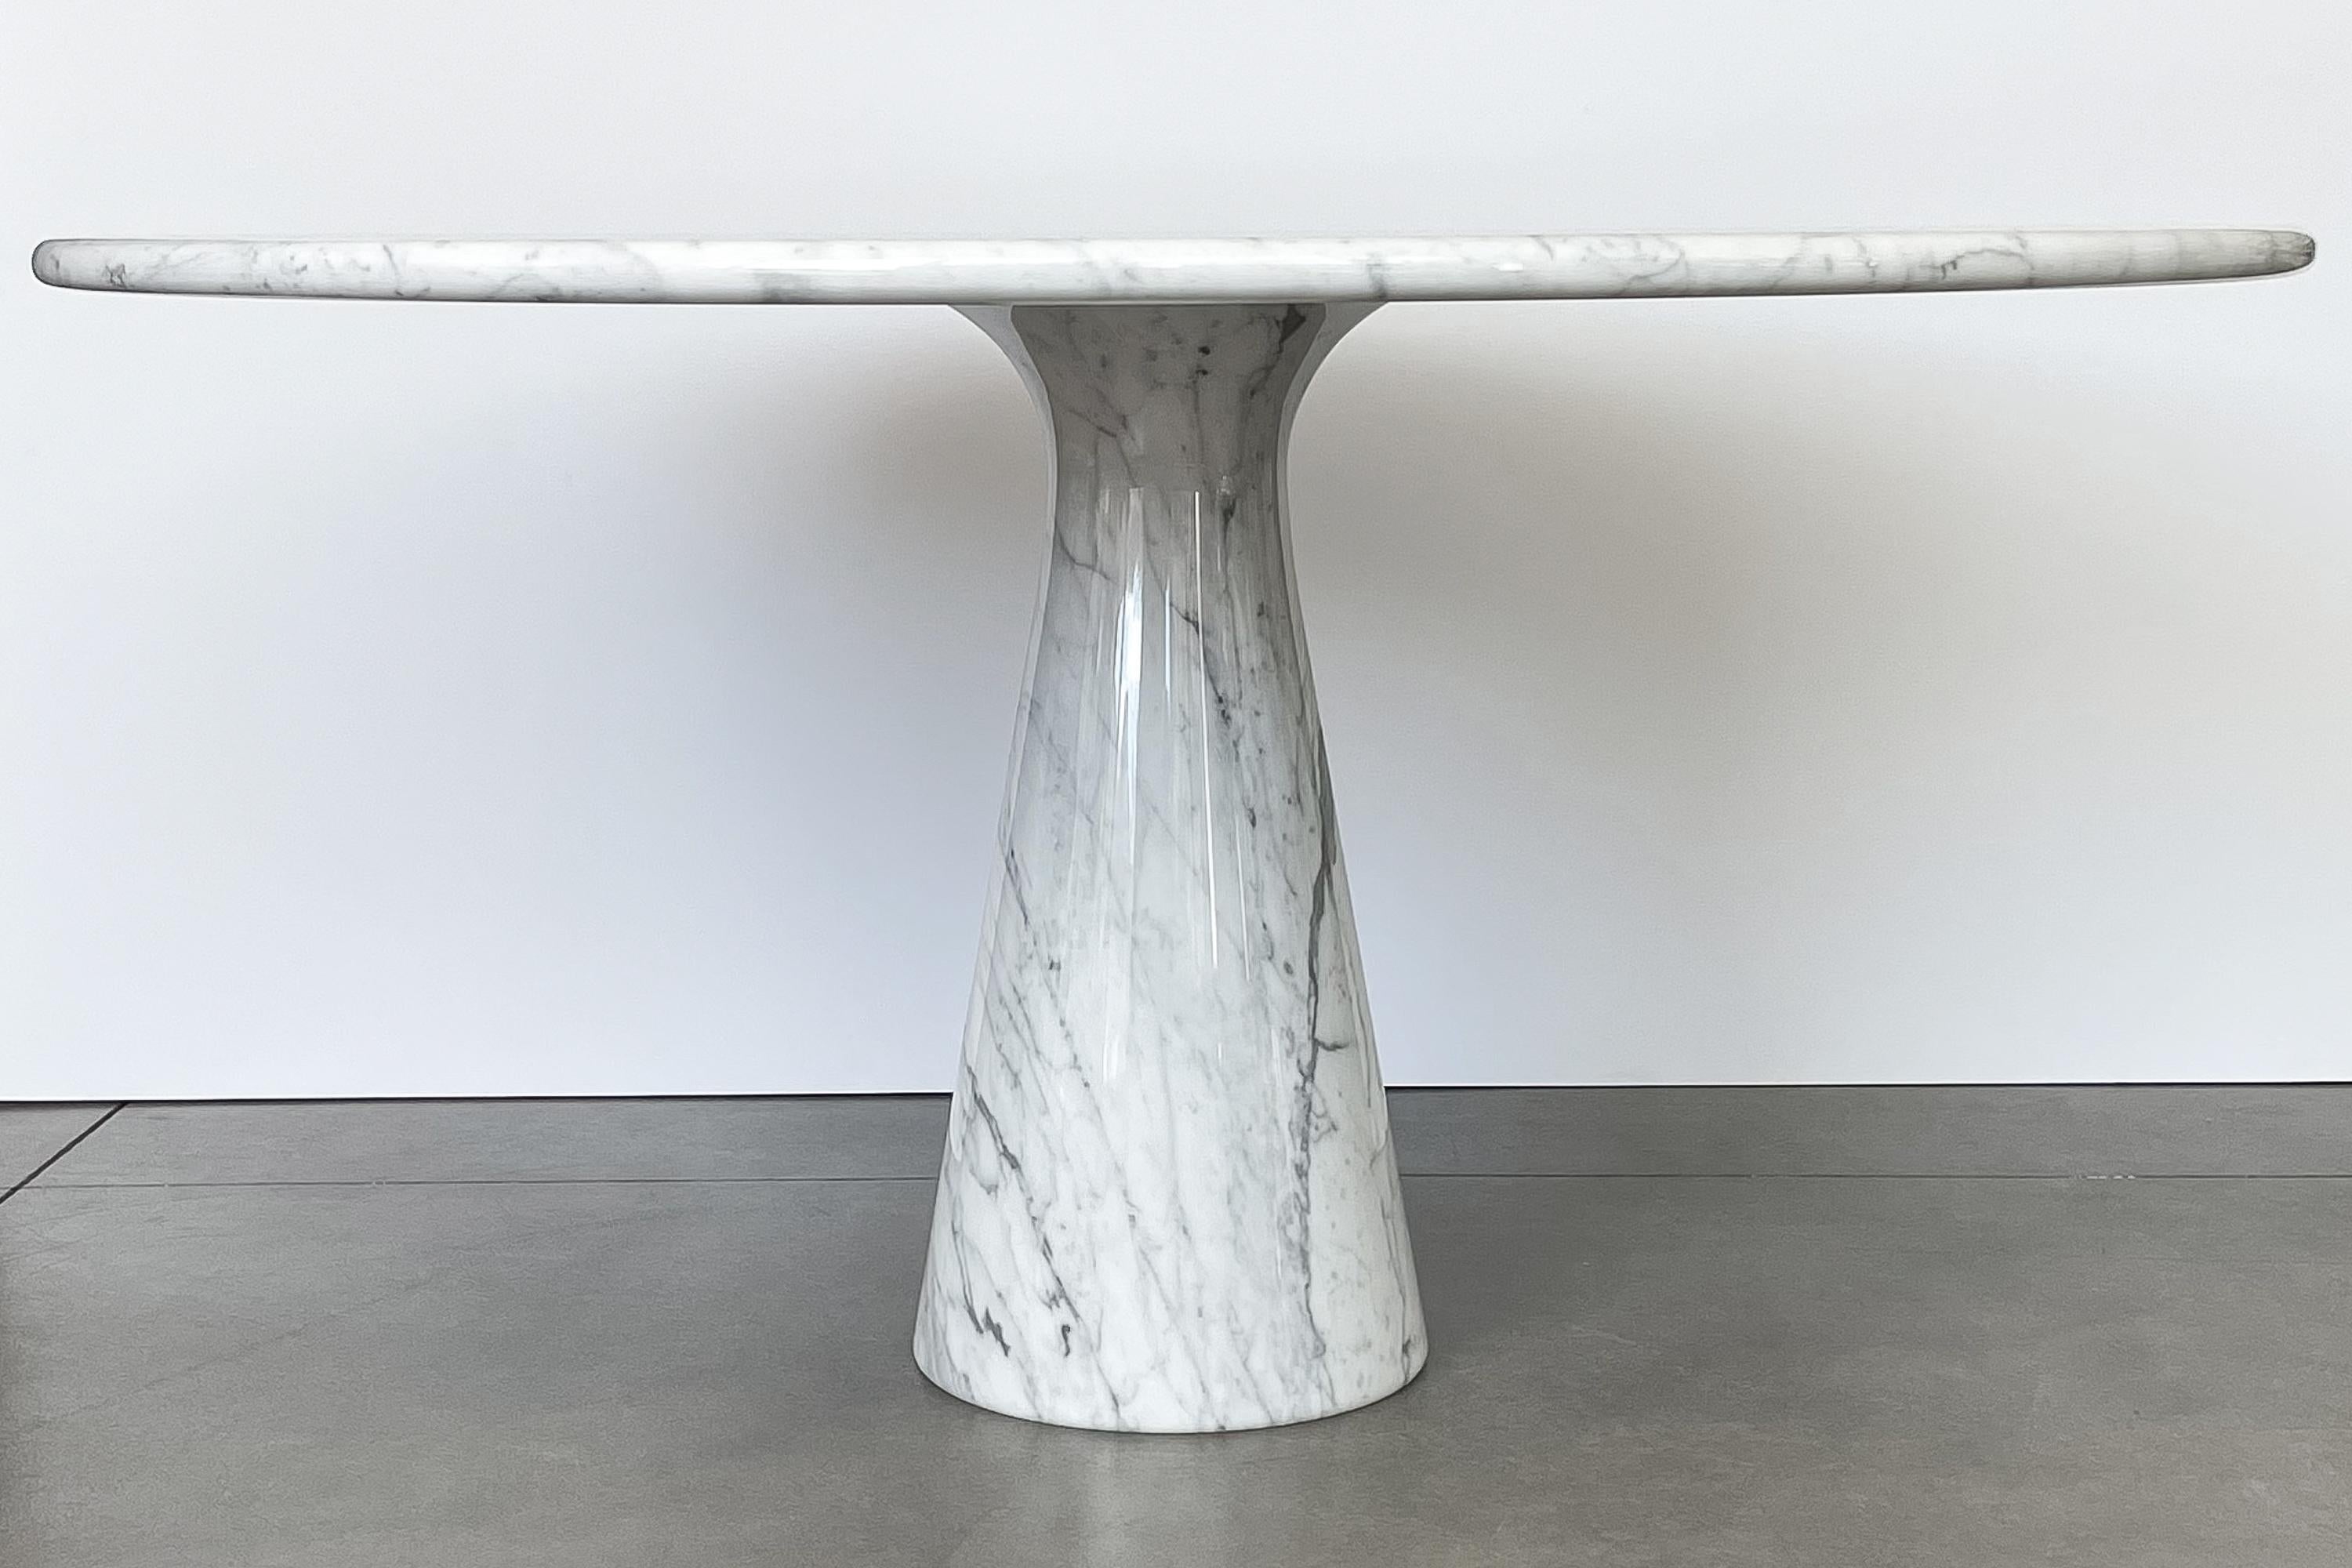 A beautiful Angelo Mangiarotti white Carrara marble M1 pedestal dining table for Skipper, Italy circa 1970s. Stunning white Carrara marble with striking gray veining. A round 1.25 inch thick top sits on single truncated conical marble pedestal which